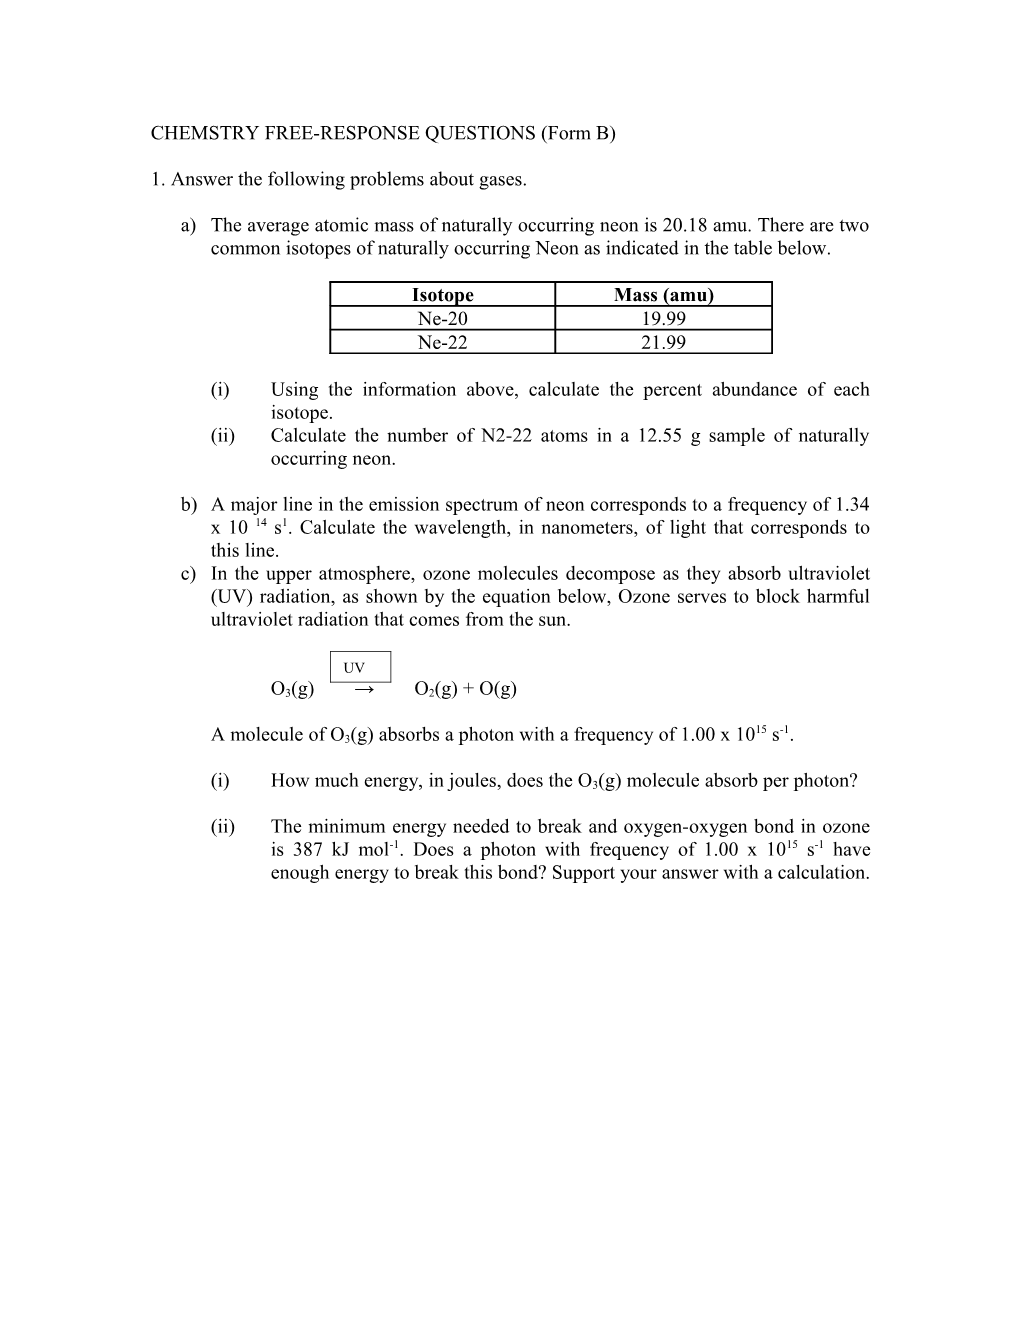 CHEMSTRY FREE-RESPONSE QUESTIONS (Form B)